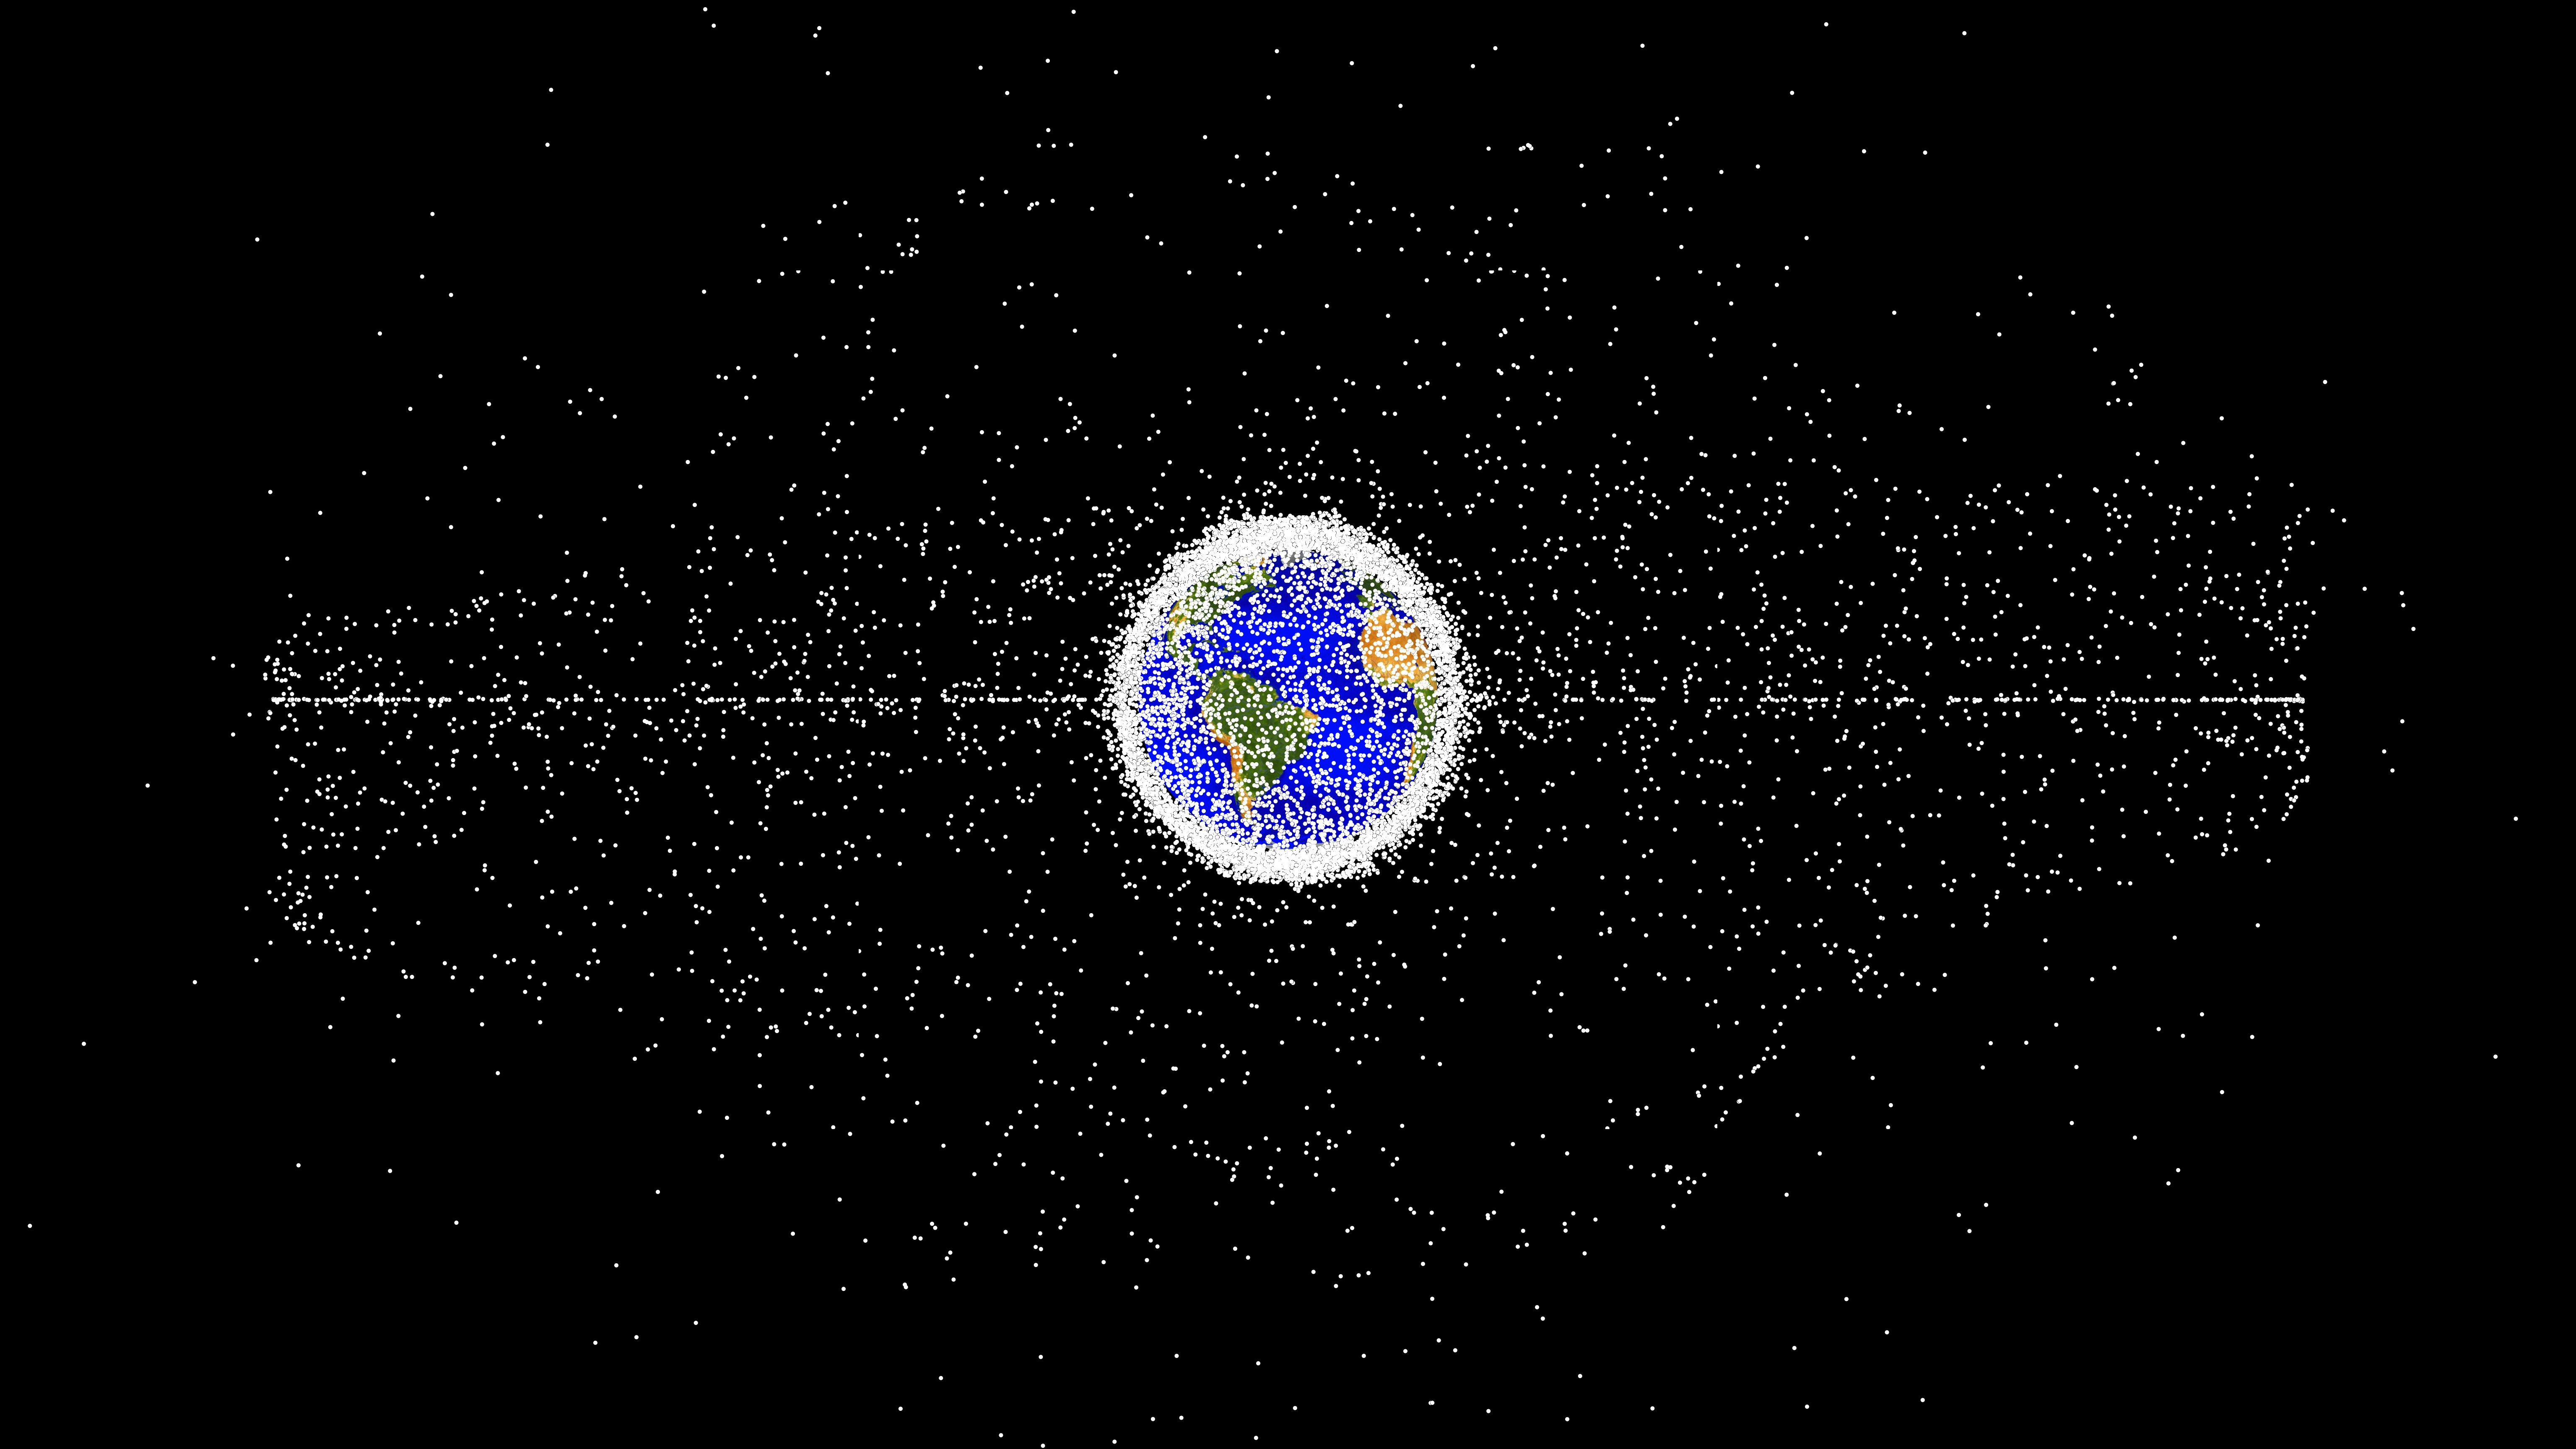 Studying space weather can help address space debris. Here’s how Space